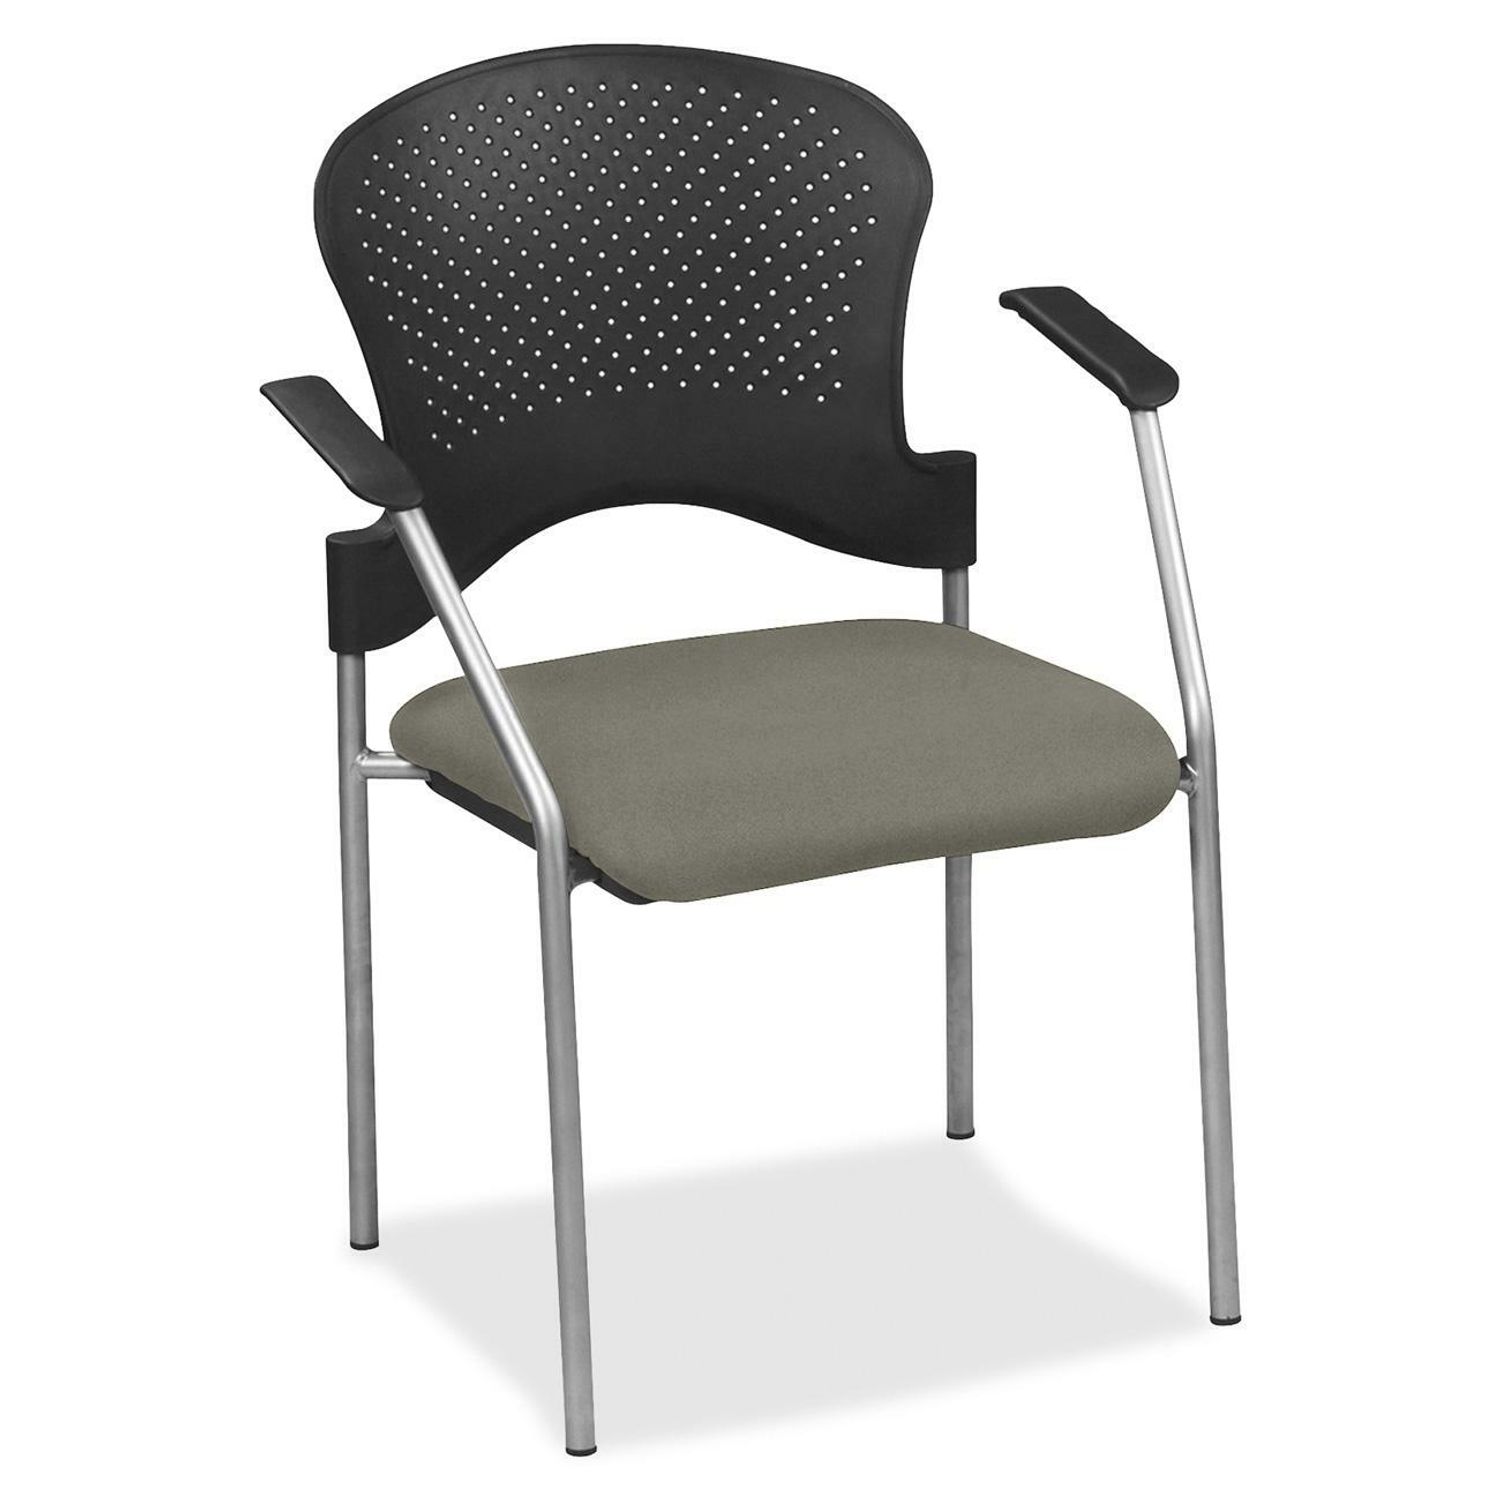 breeze FS8277 Stacking Chair Stone Fabric Seat, Stone Back, Gray Steel Frame, Four-legged Base, 1 Each